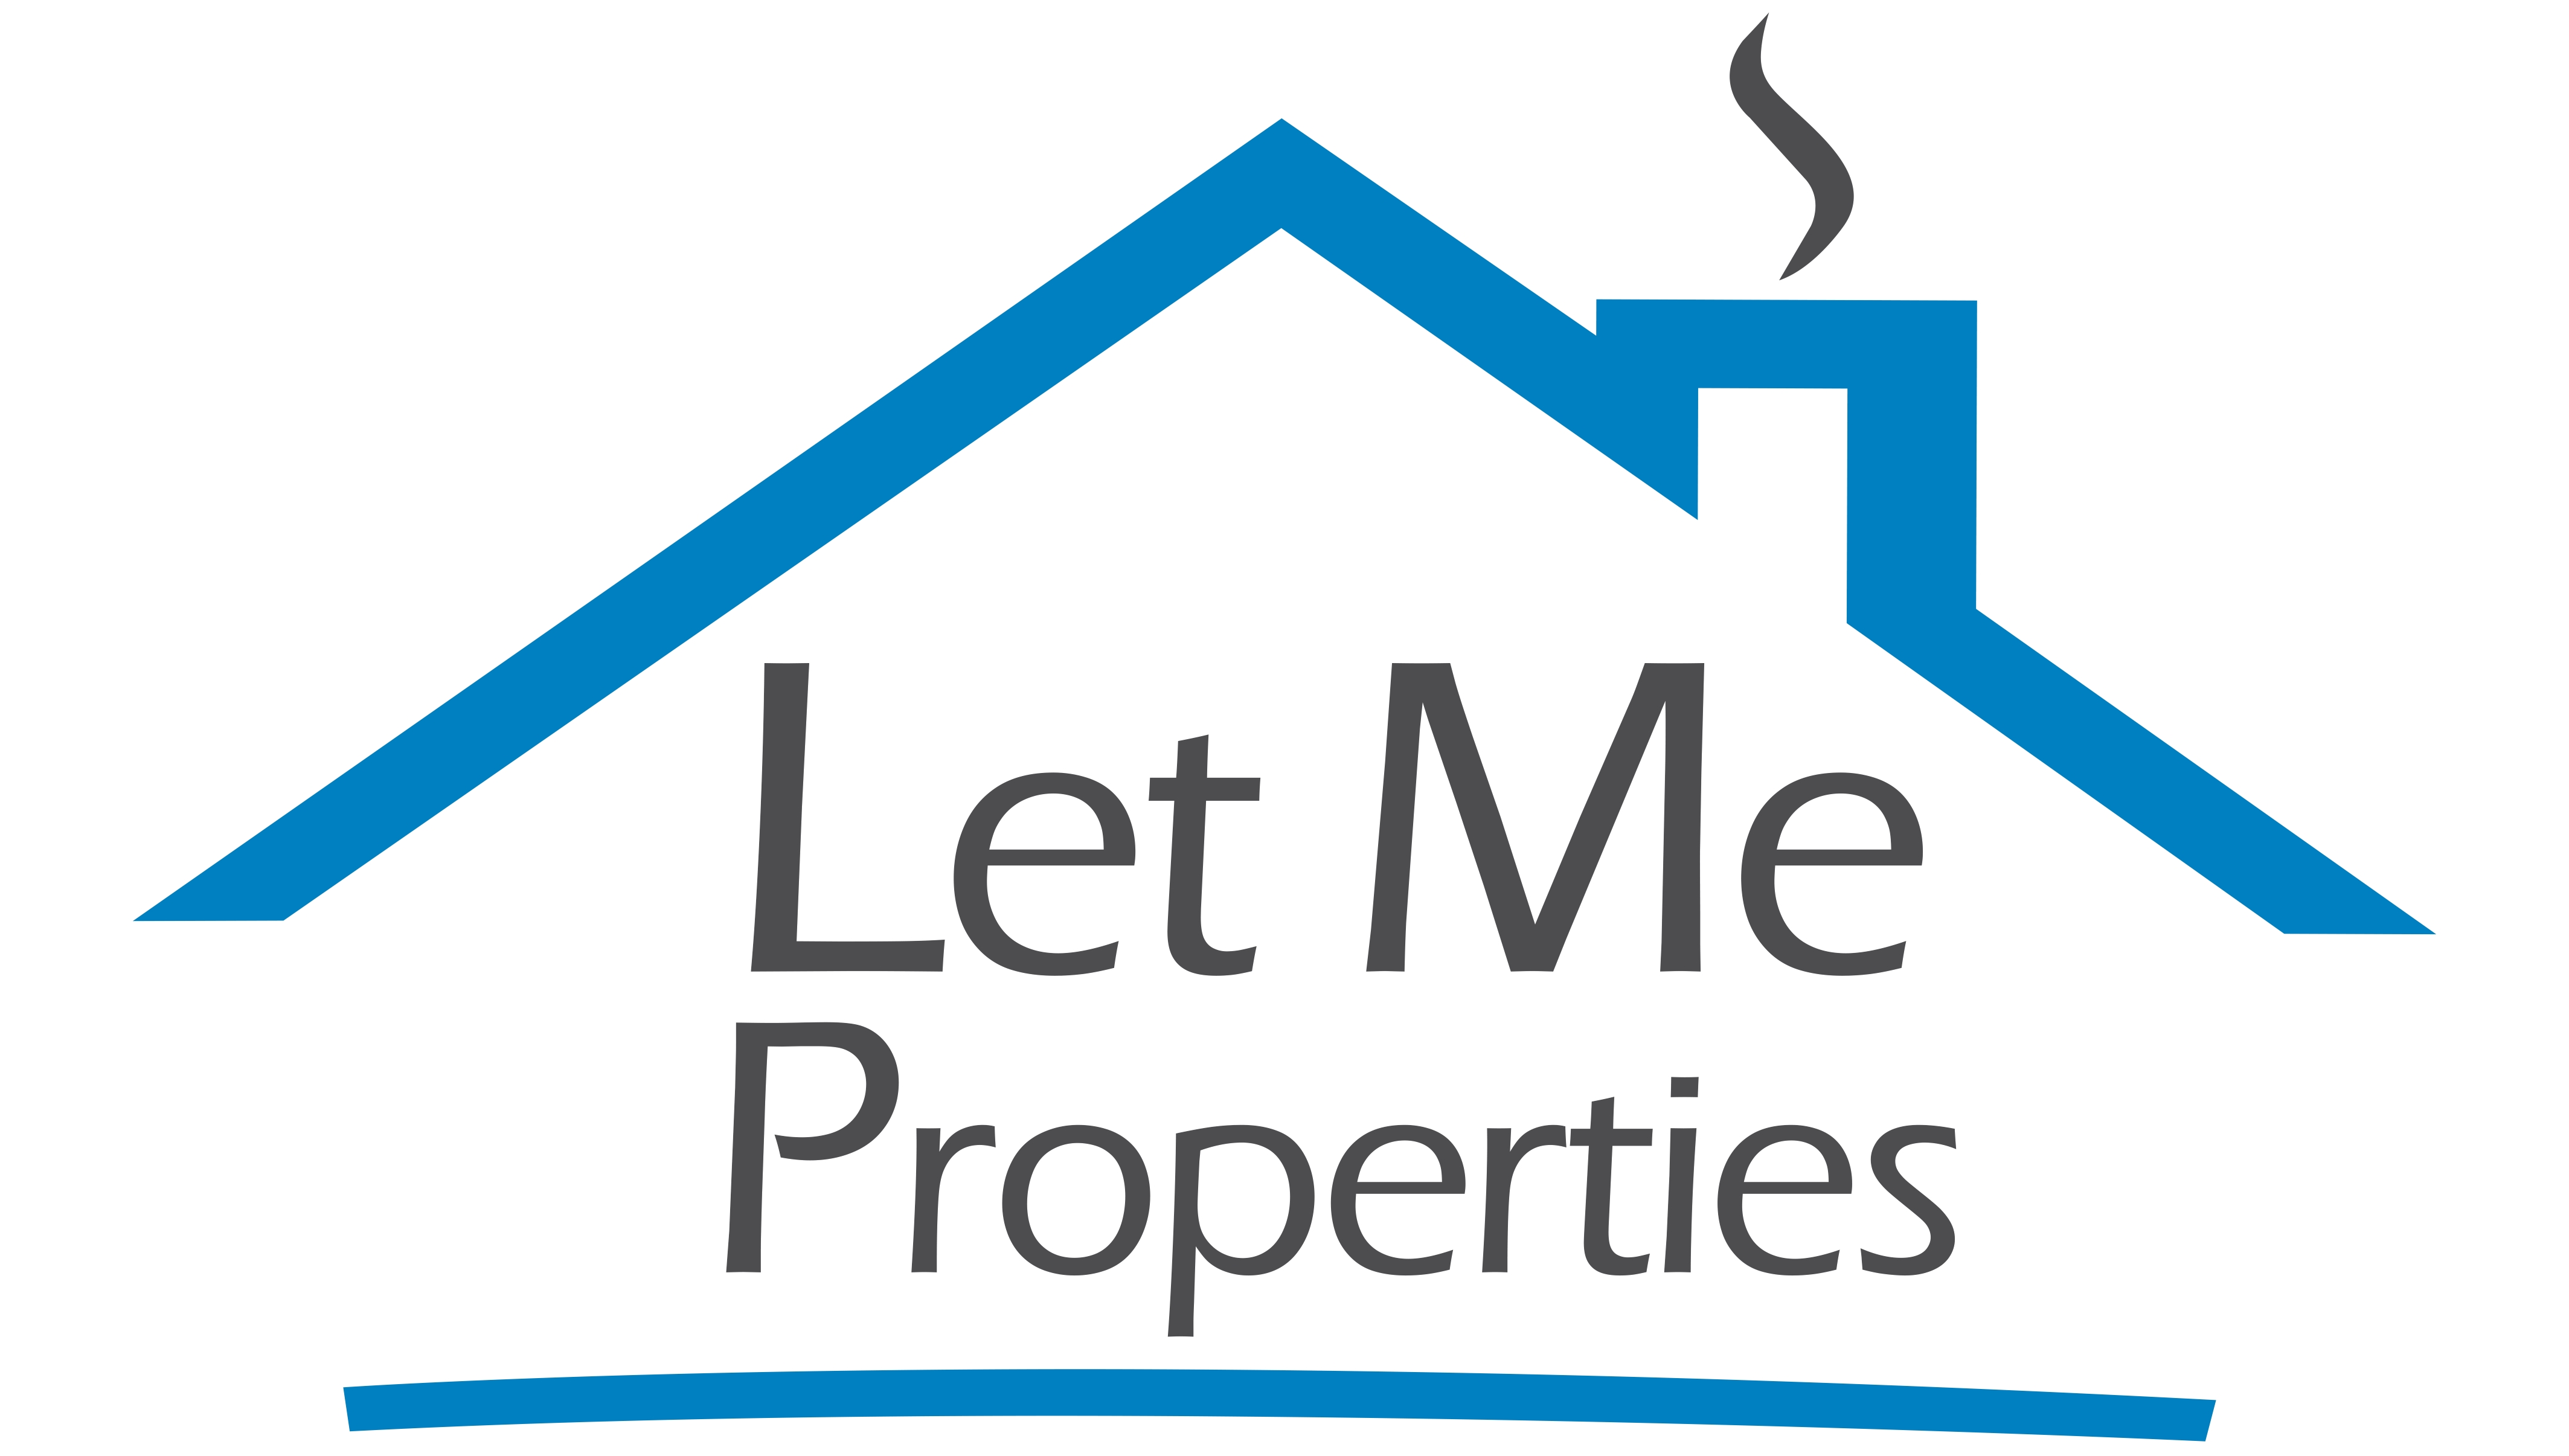 Let Me Properties : Letting agents in Potters Bar Hertfordshire